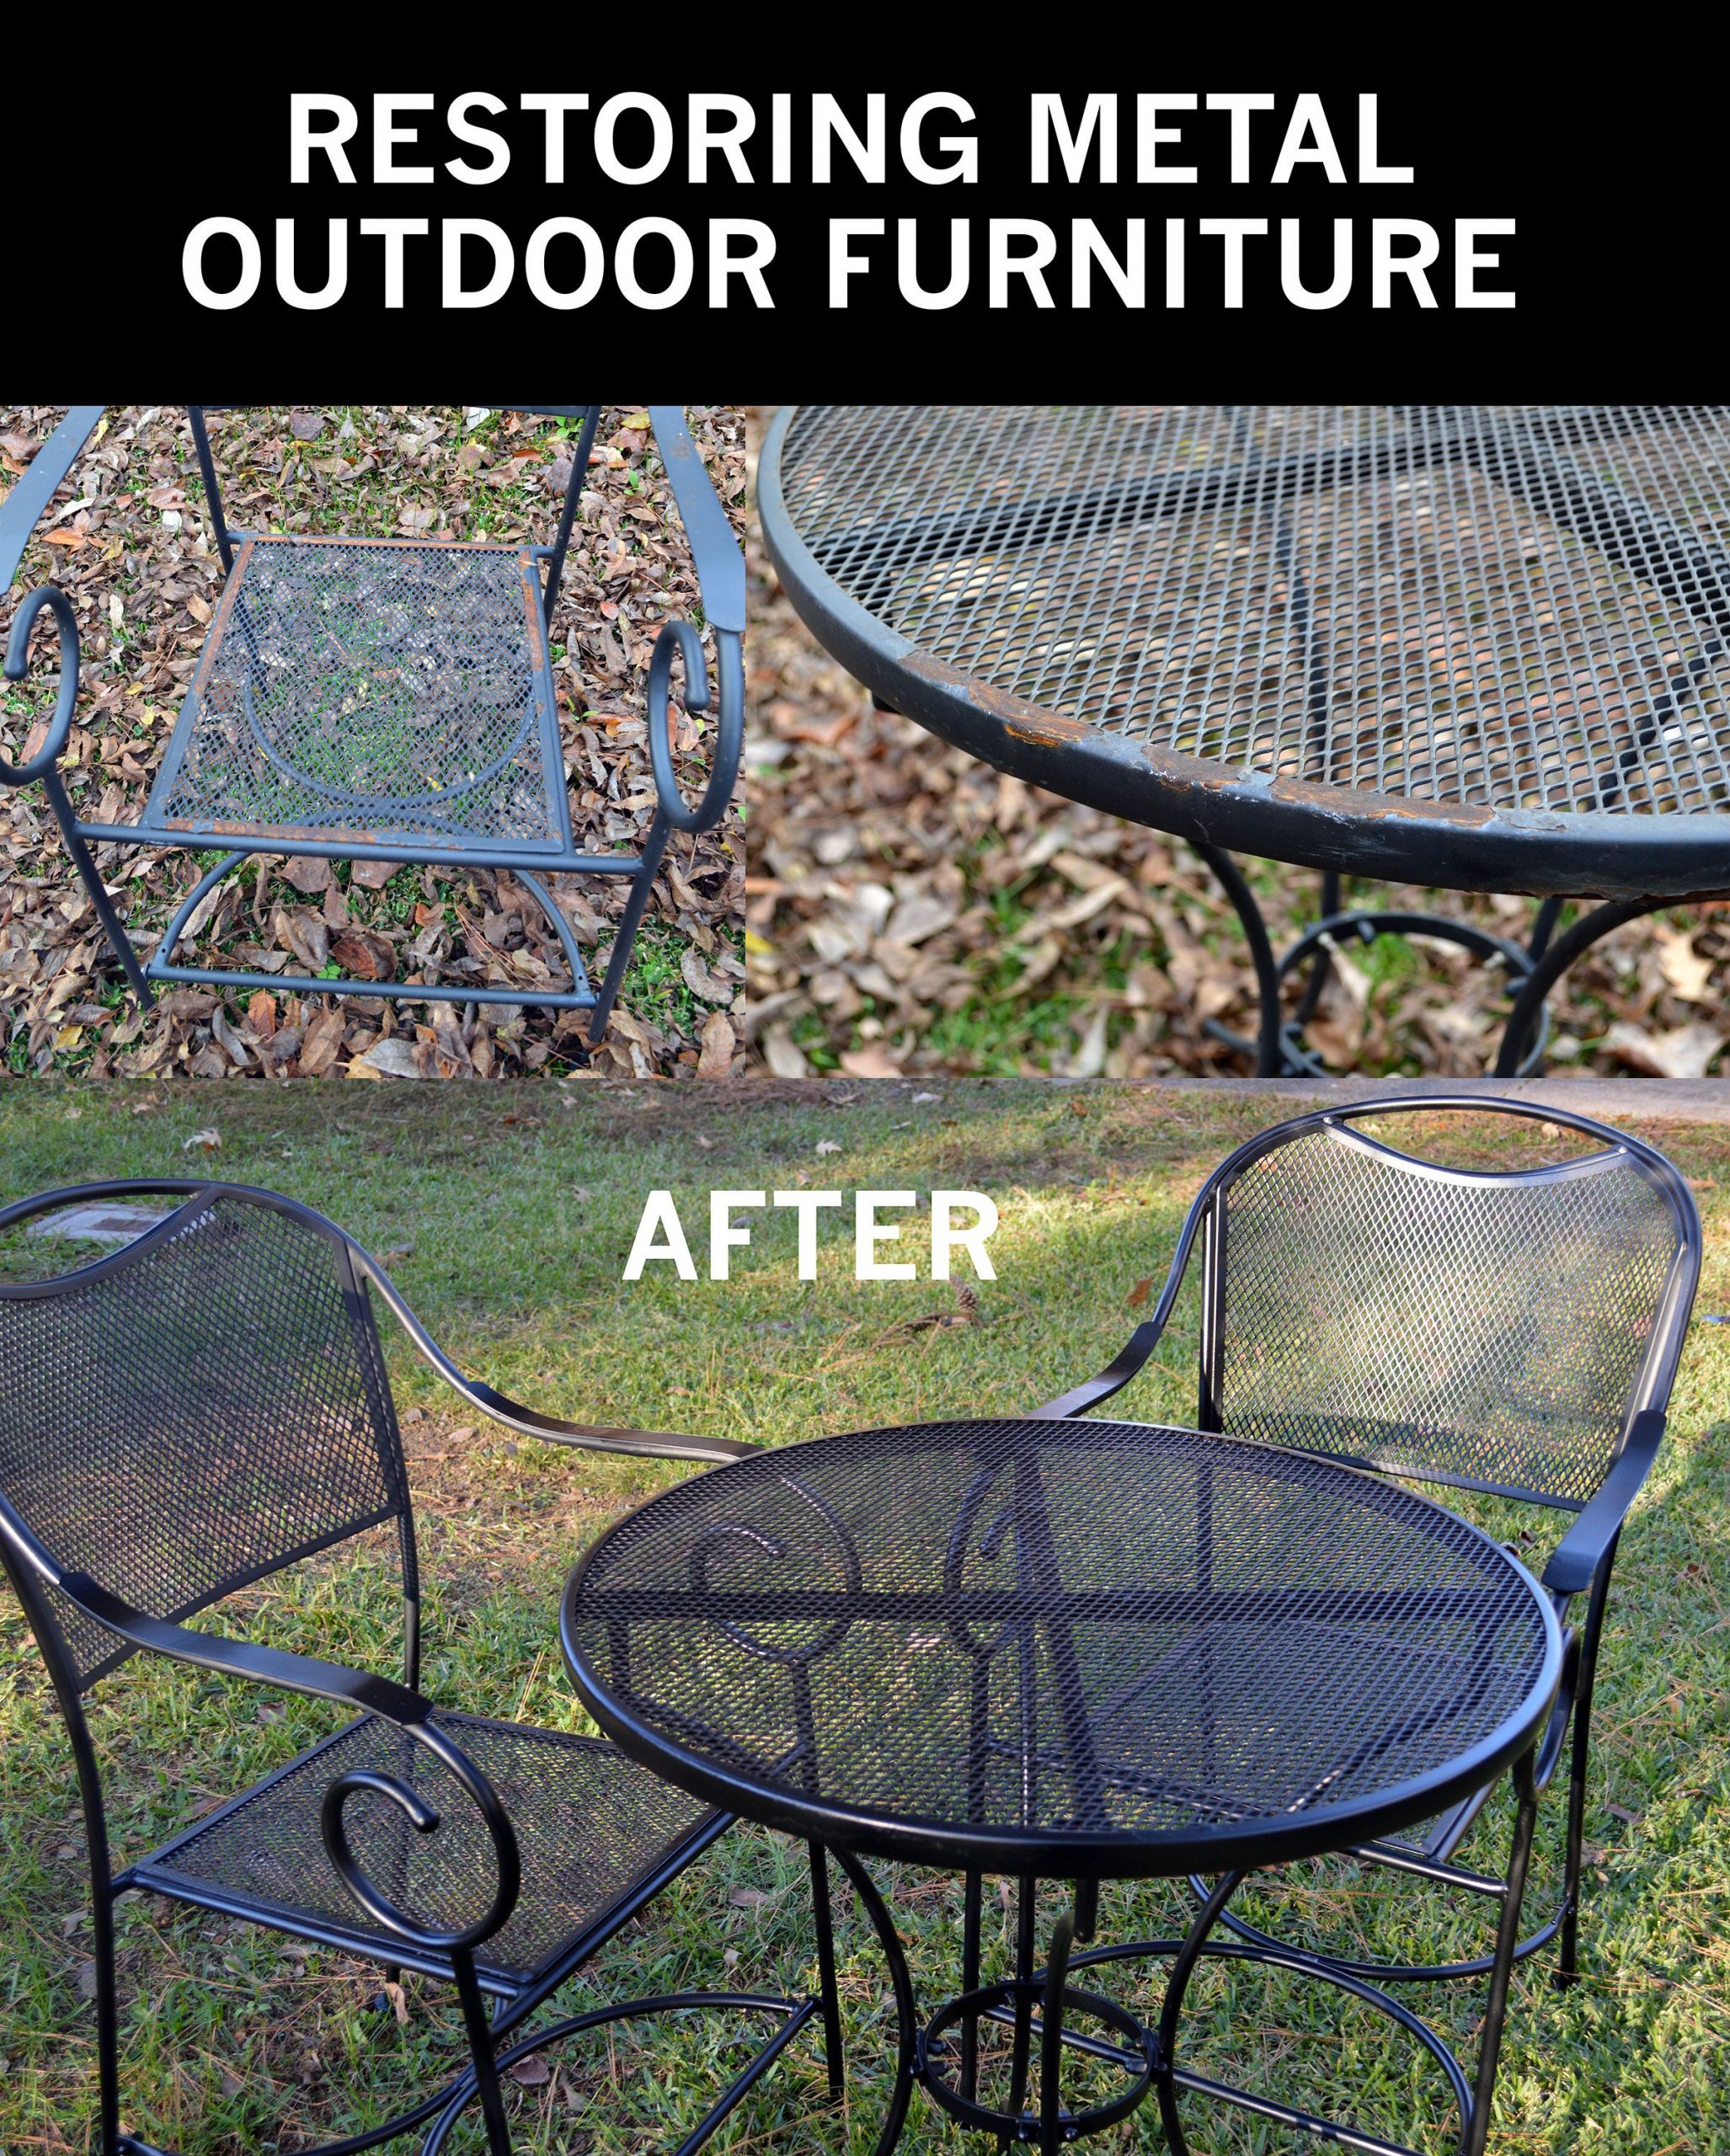 Restore metal outdoor furniture to ‘like new’